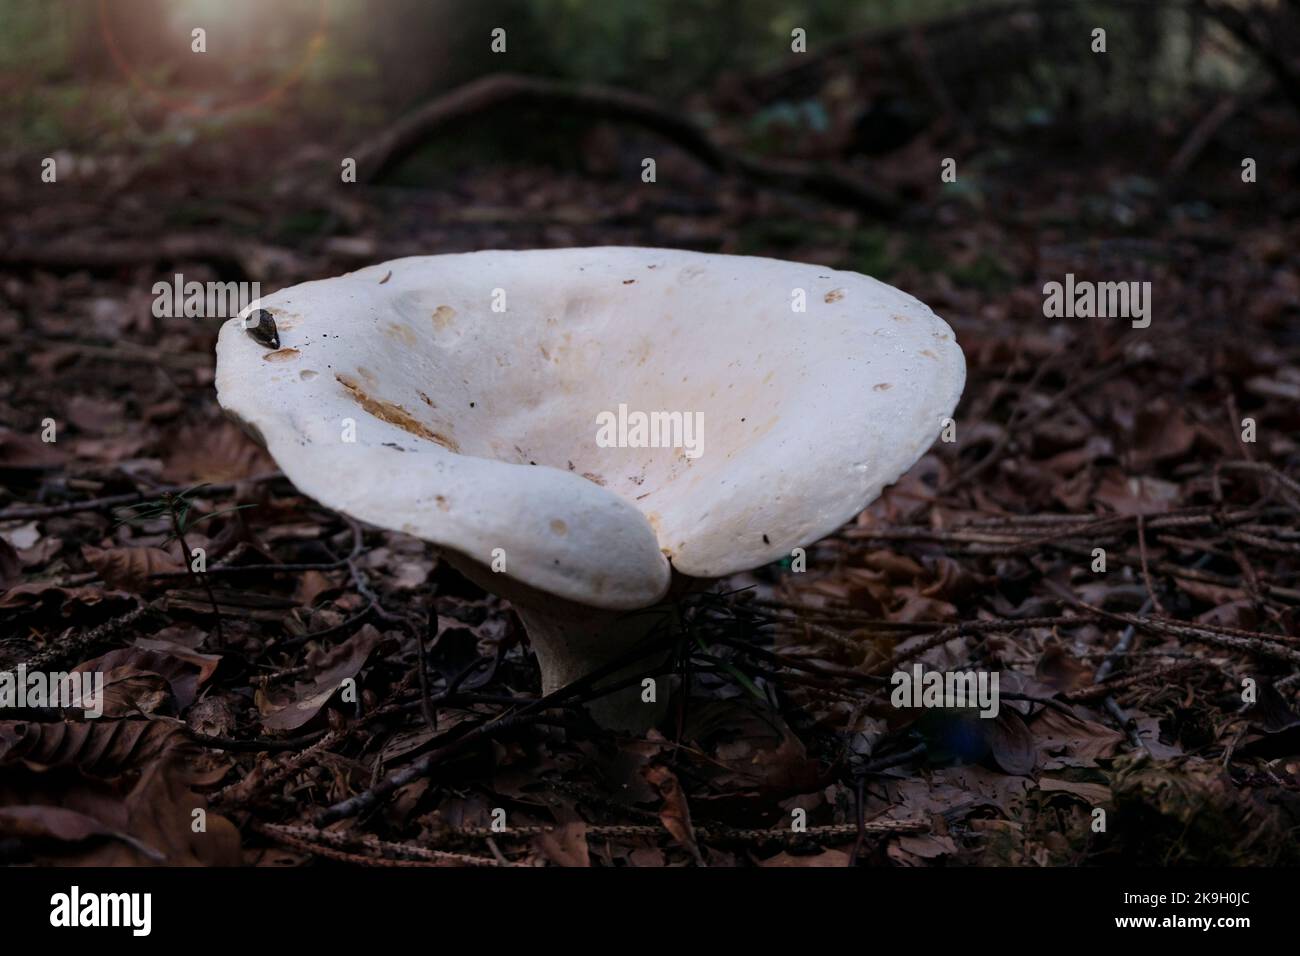 Lactarius vellereus commonly known as the fleecy milk-cap. Big white mushroom and autumn leaves on the ground. Stock Photo